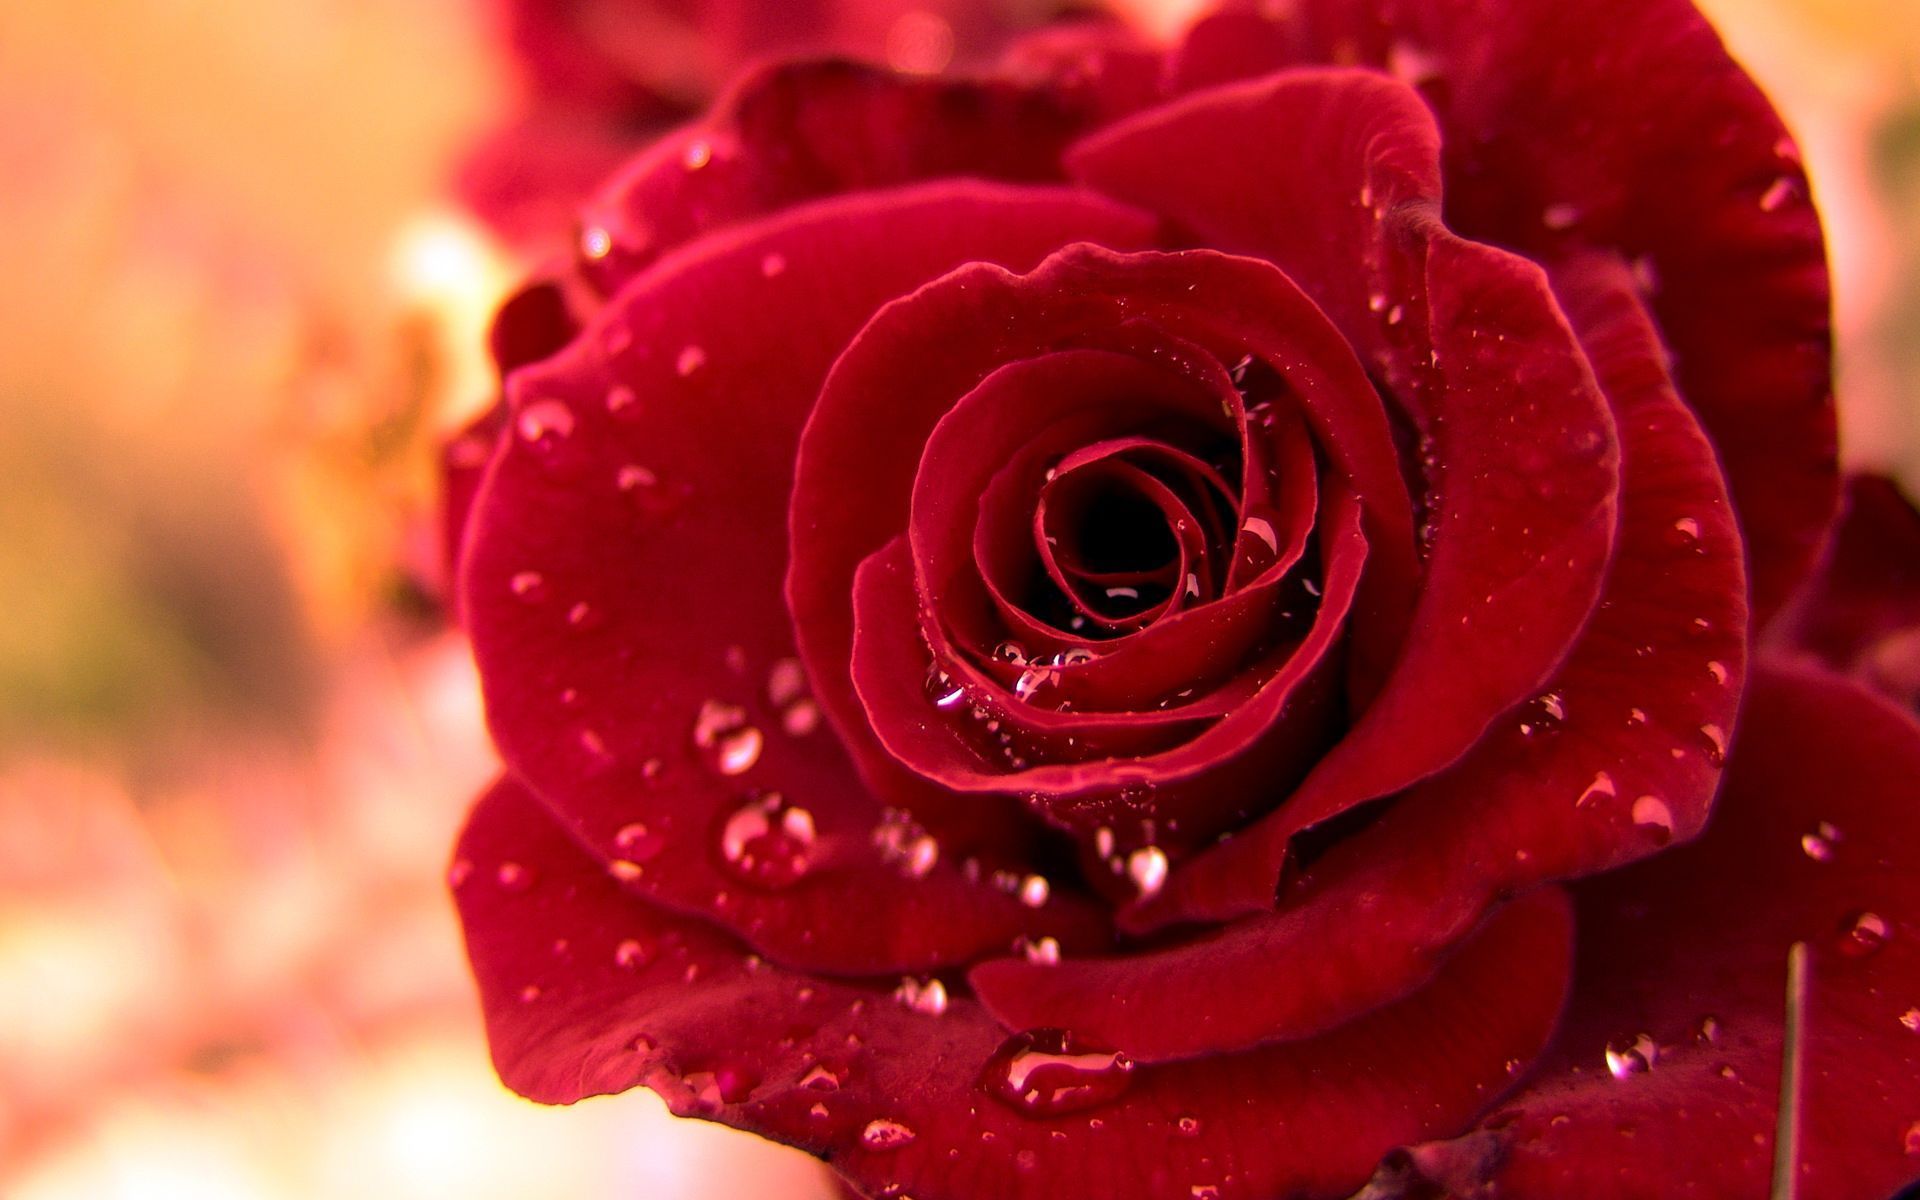 World's Most Beautiful Roses Flowers Wallpapers on WallpaperDog